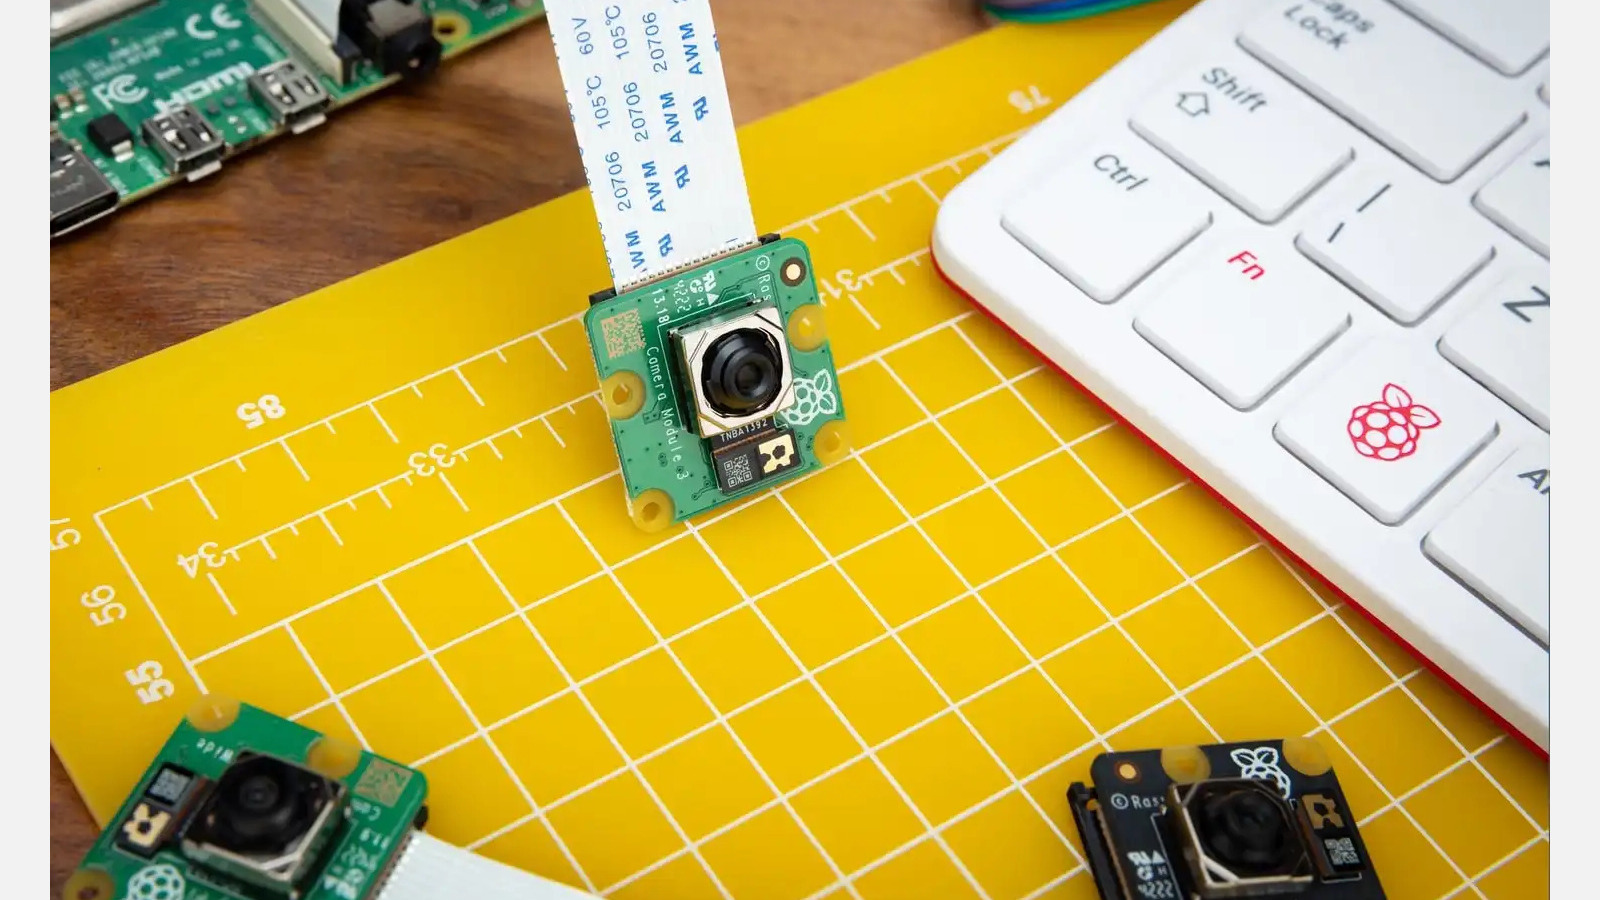 4 Of The Best Raspberry Pi Cameras In 2023: Which Is Best For Your Project? – SlashGear